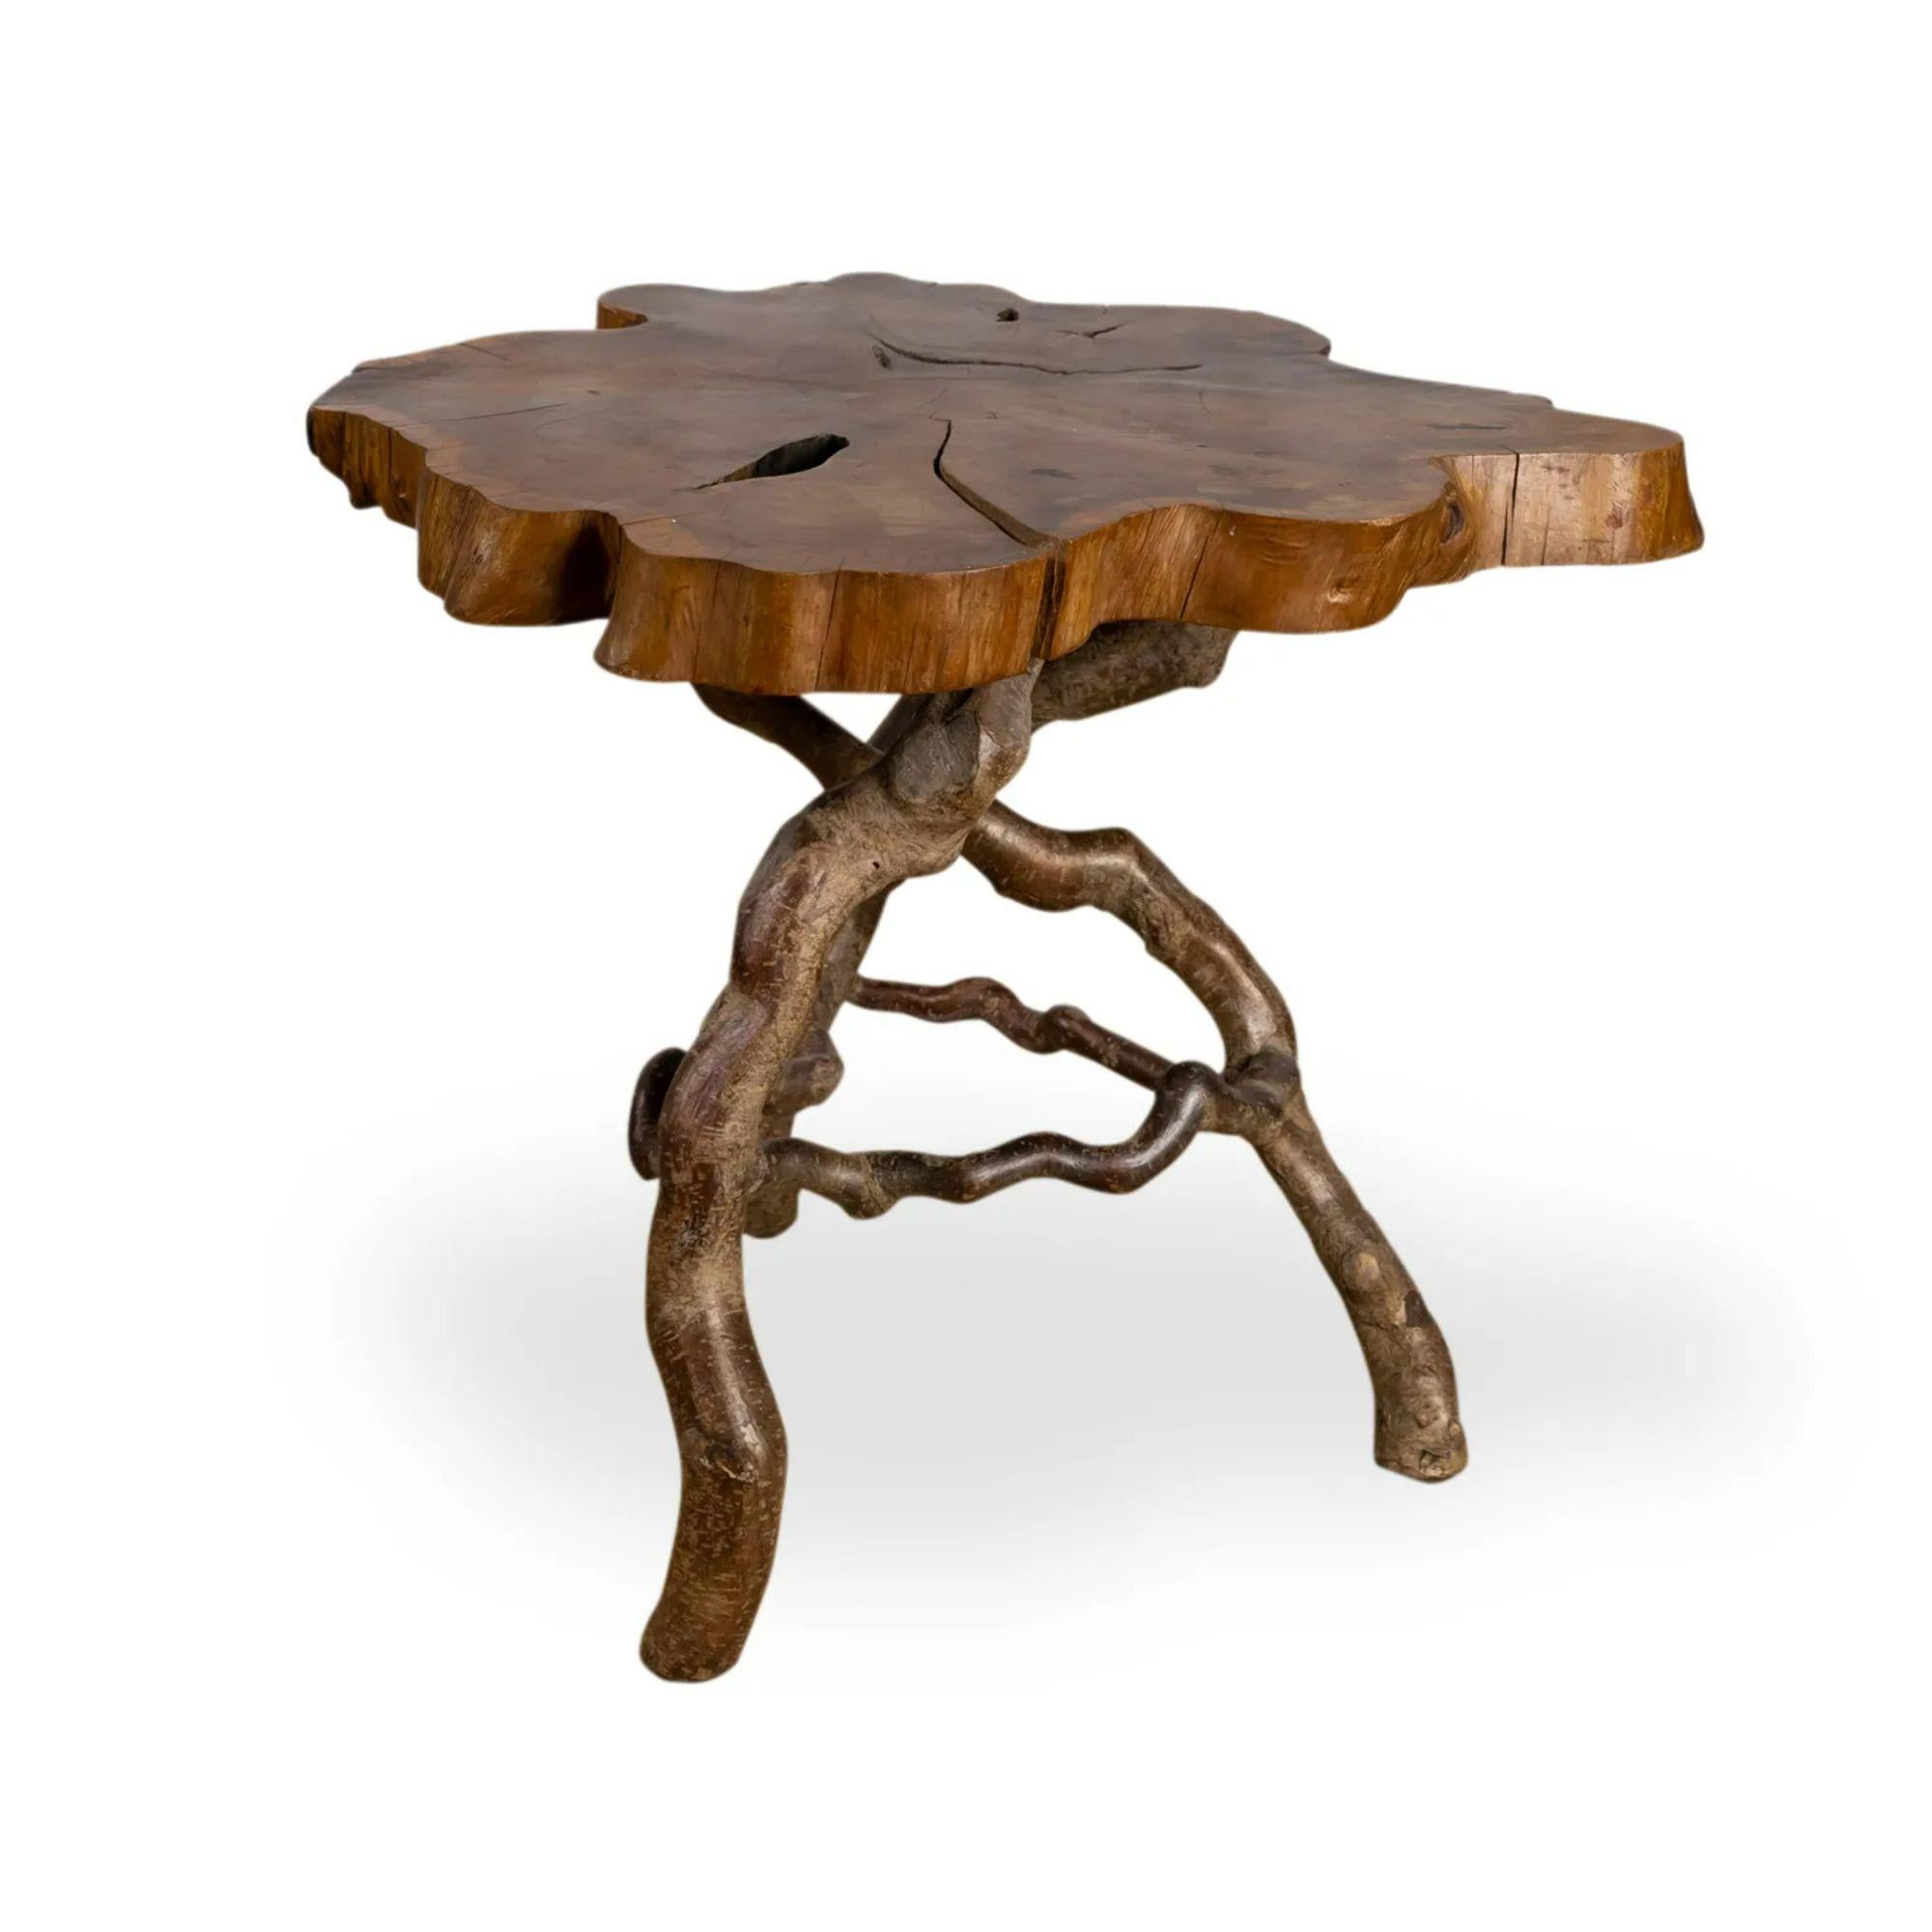 English Laburnum root wood table, Early 20th Century

A charming rustic laburnum-wood occasional table. The polished top rests on a later stick-base retaining its natural bark. 

Dimensions: H 47cm x D 53cm x Dia. 65cm.